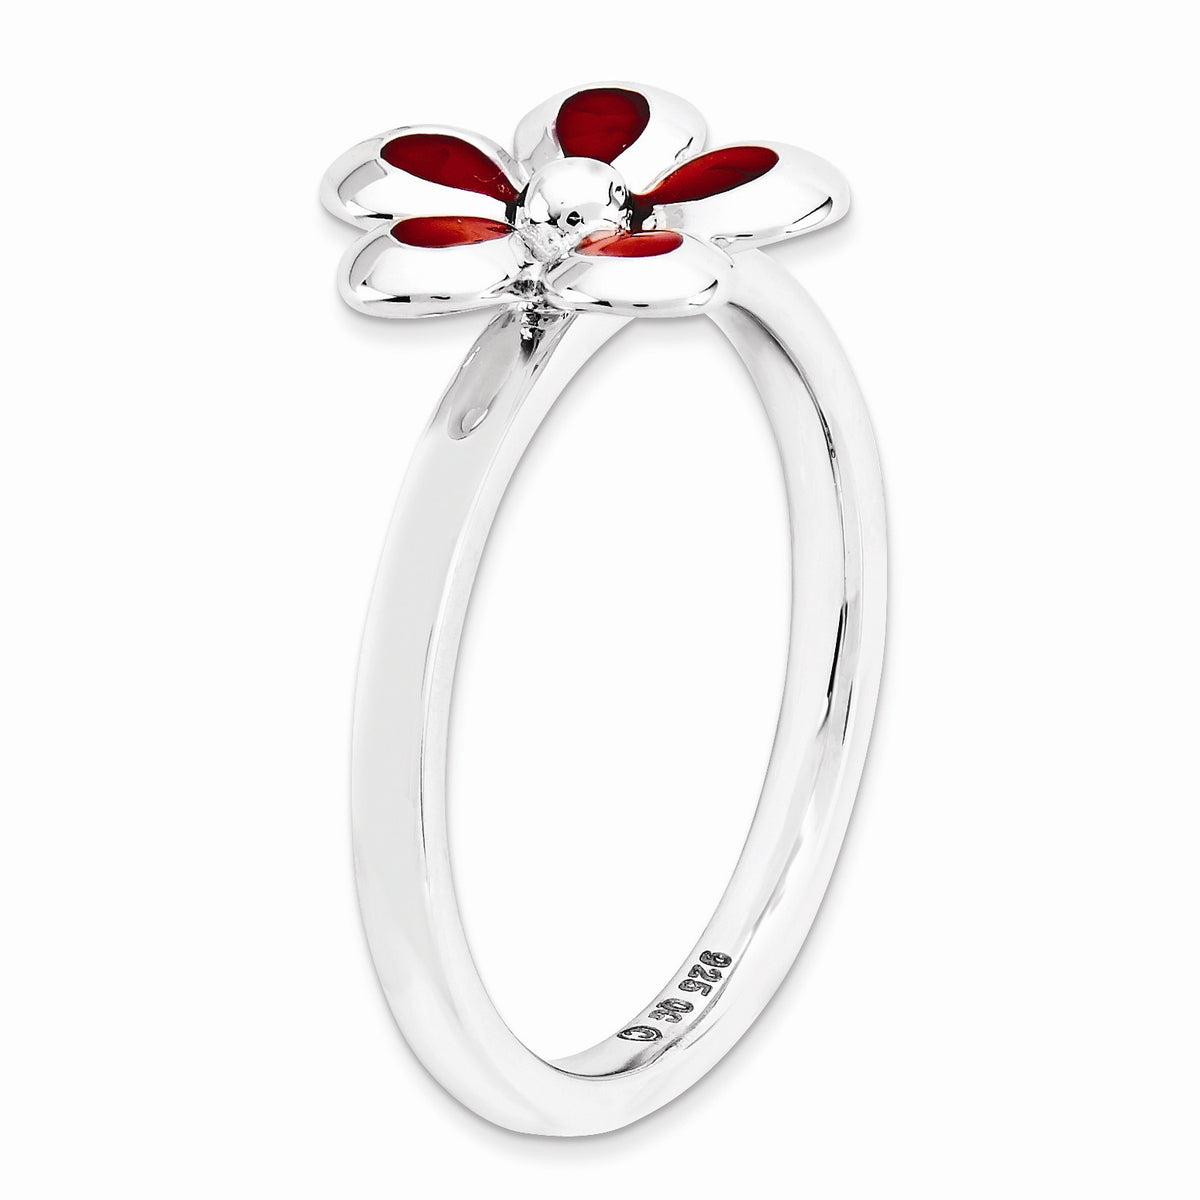 Alternate view of the Sterling Silver Stackable Red Enameled Flower Ring by The Black Bow Jewelry Co.